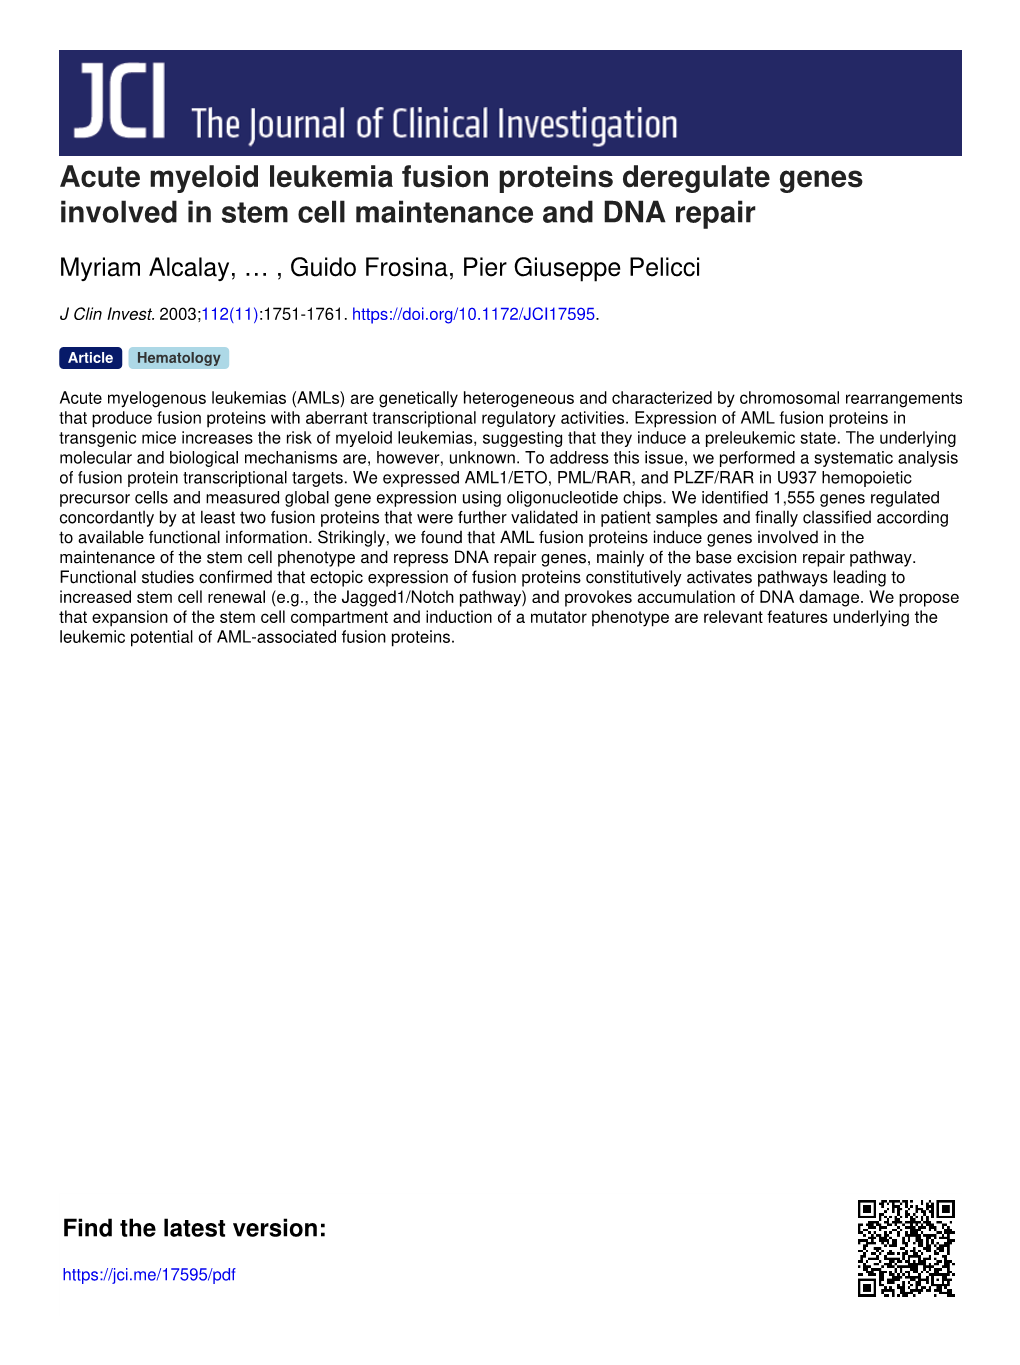 Acute Myeloid Leukemia Fusion Proteins Deregulate Genes Involved in Stem Cell Maintenance and DNA Repair